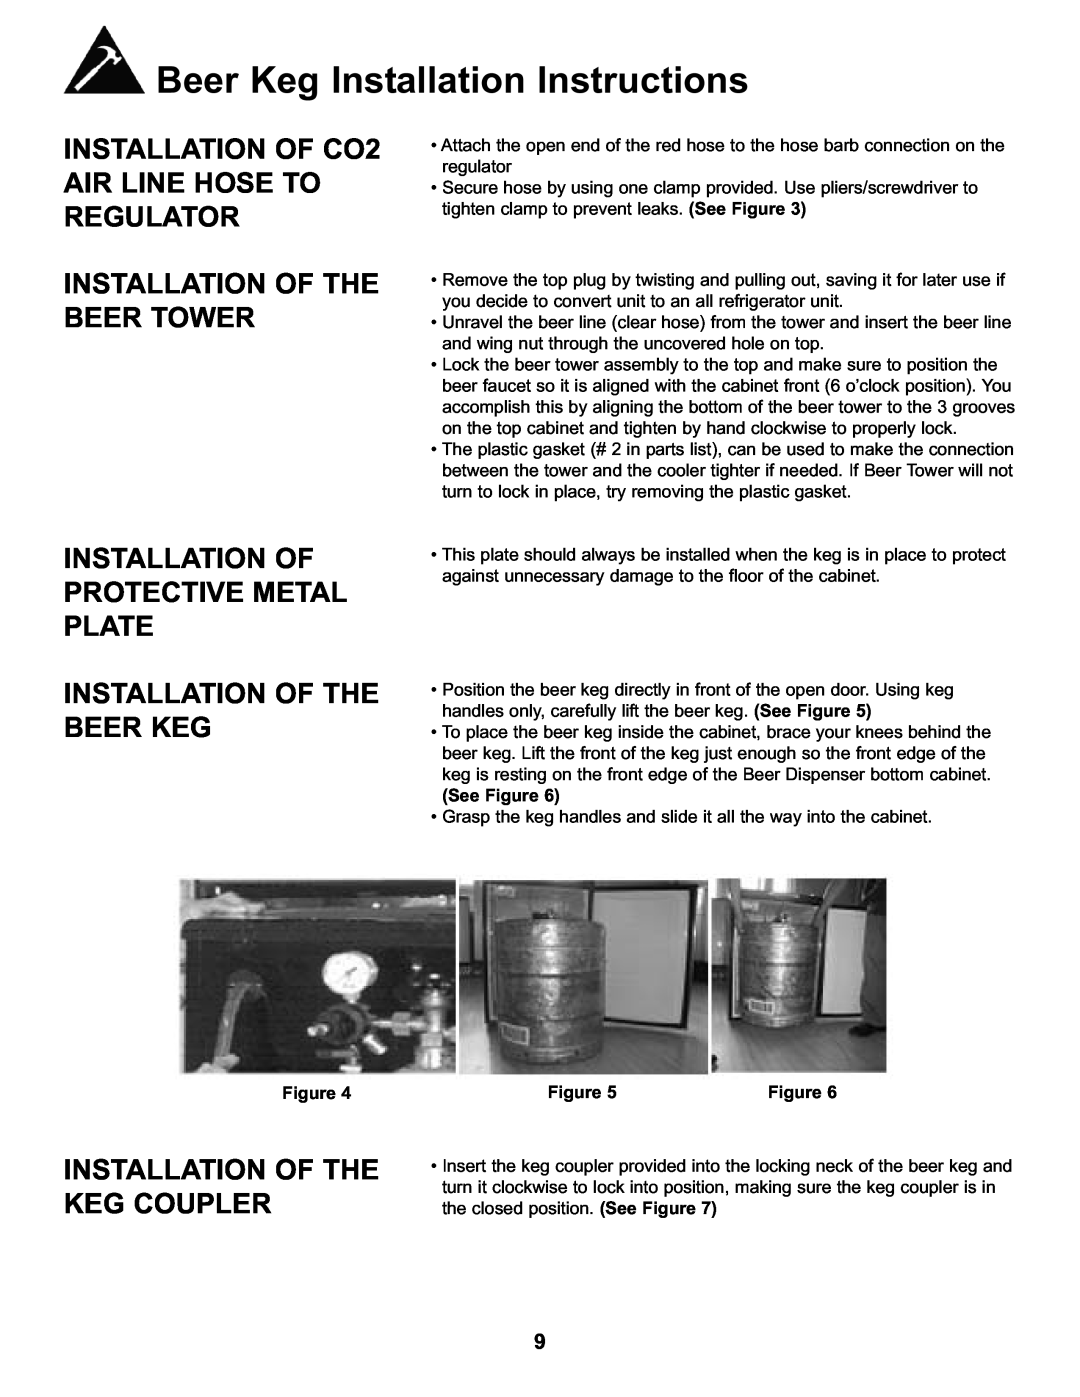 Danby DKC146SLDB manual INSTALLATION OF CO2 AIR LINE HOSE TO REGULATOR, Installation Of The Beer Tower, See Figure 